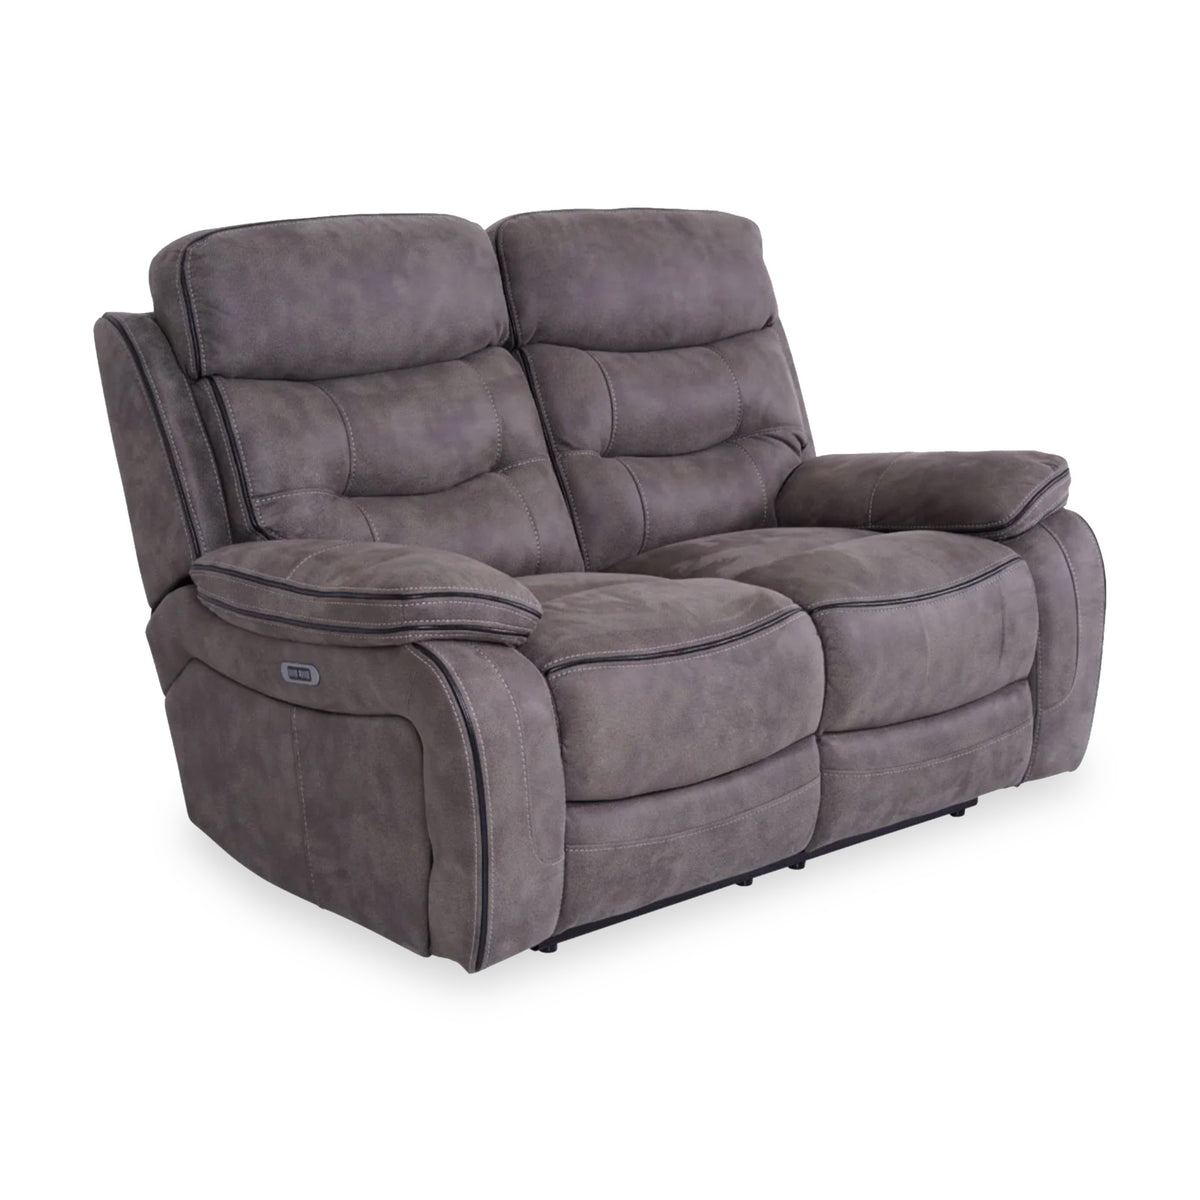 Stanford Charcoal Leather Electric Reclining 2 Seater Sofa from Roseland Furniture